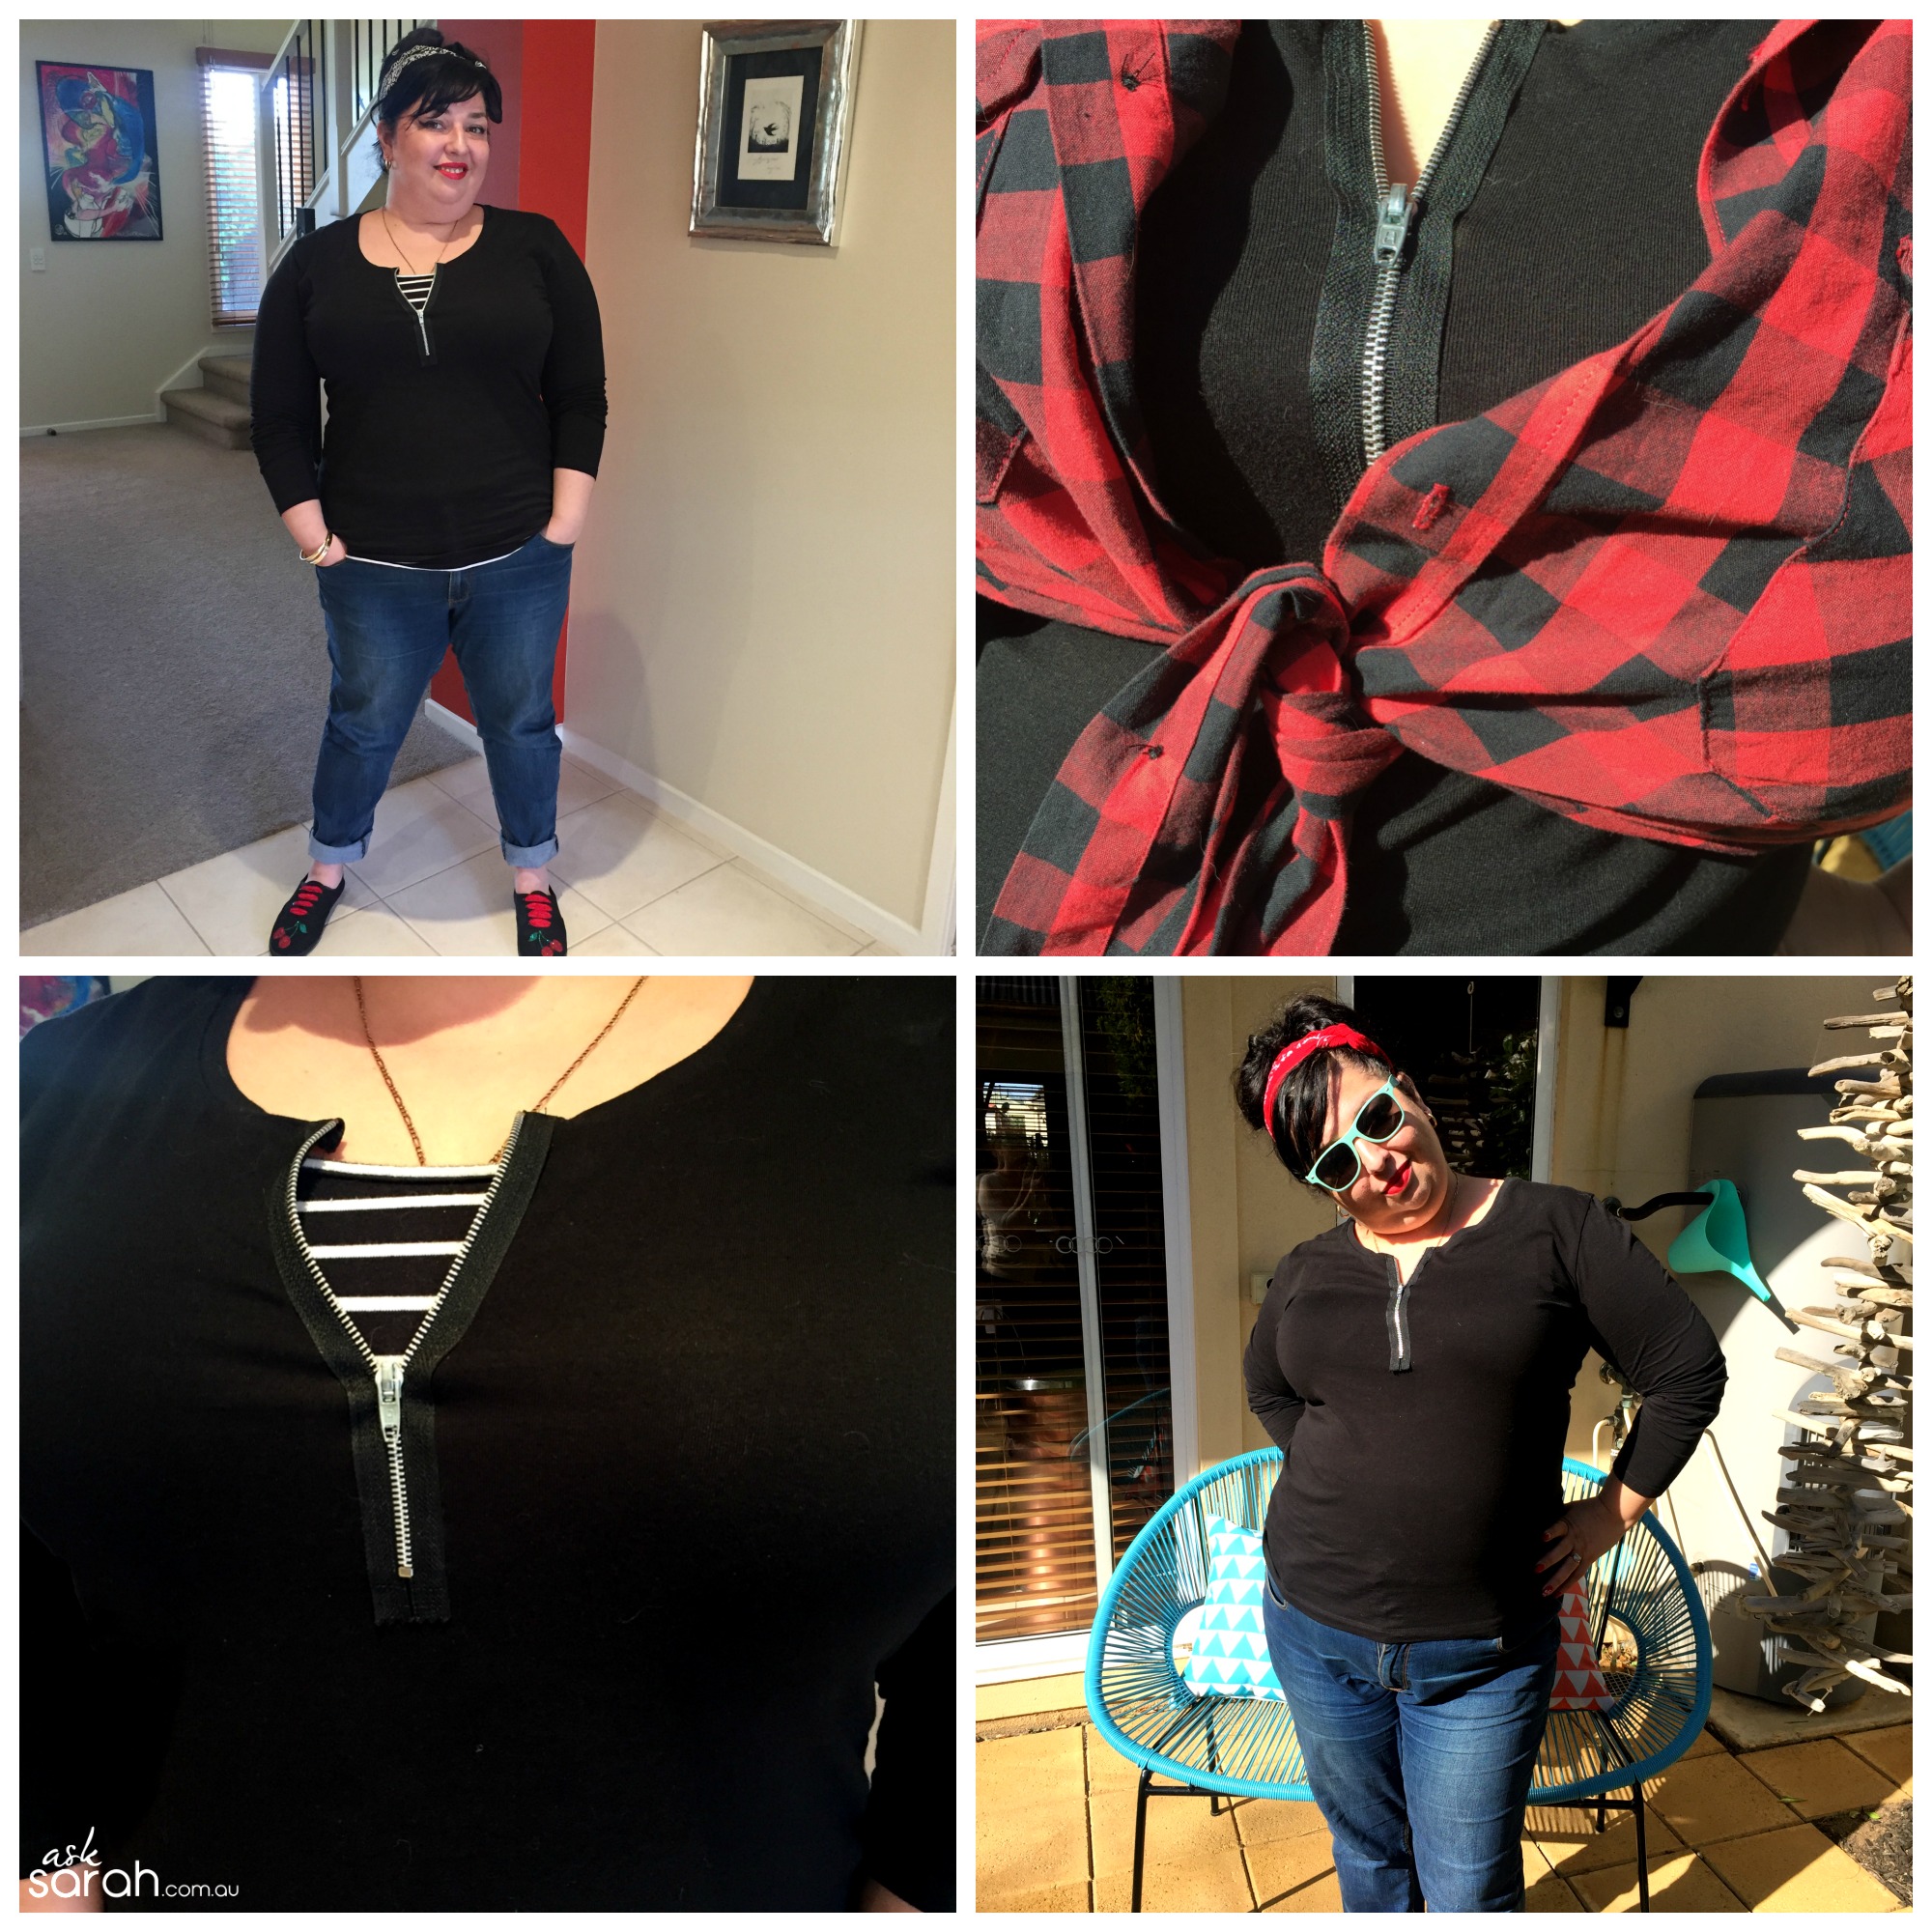 Sew: DIY Functional Exposed Zipper Tee {A 15 Min T-Shirt Makeover}